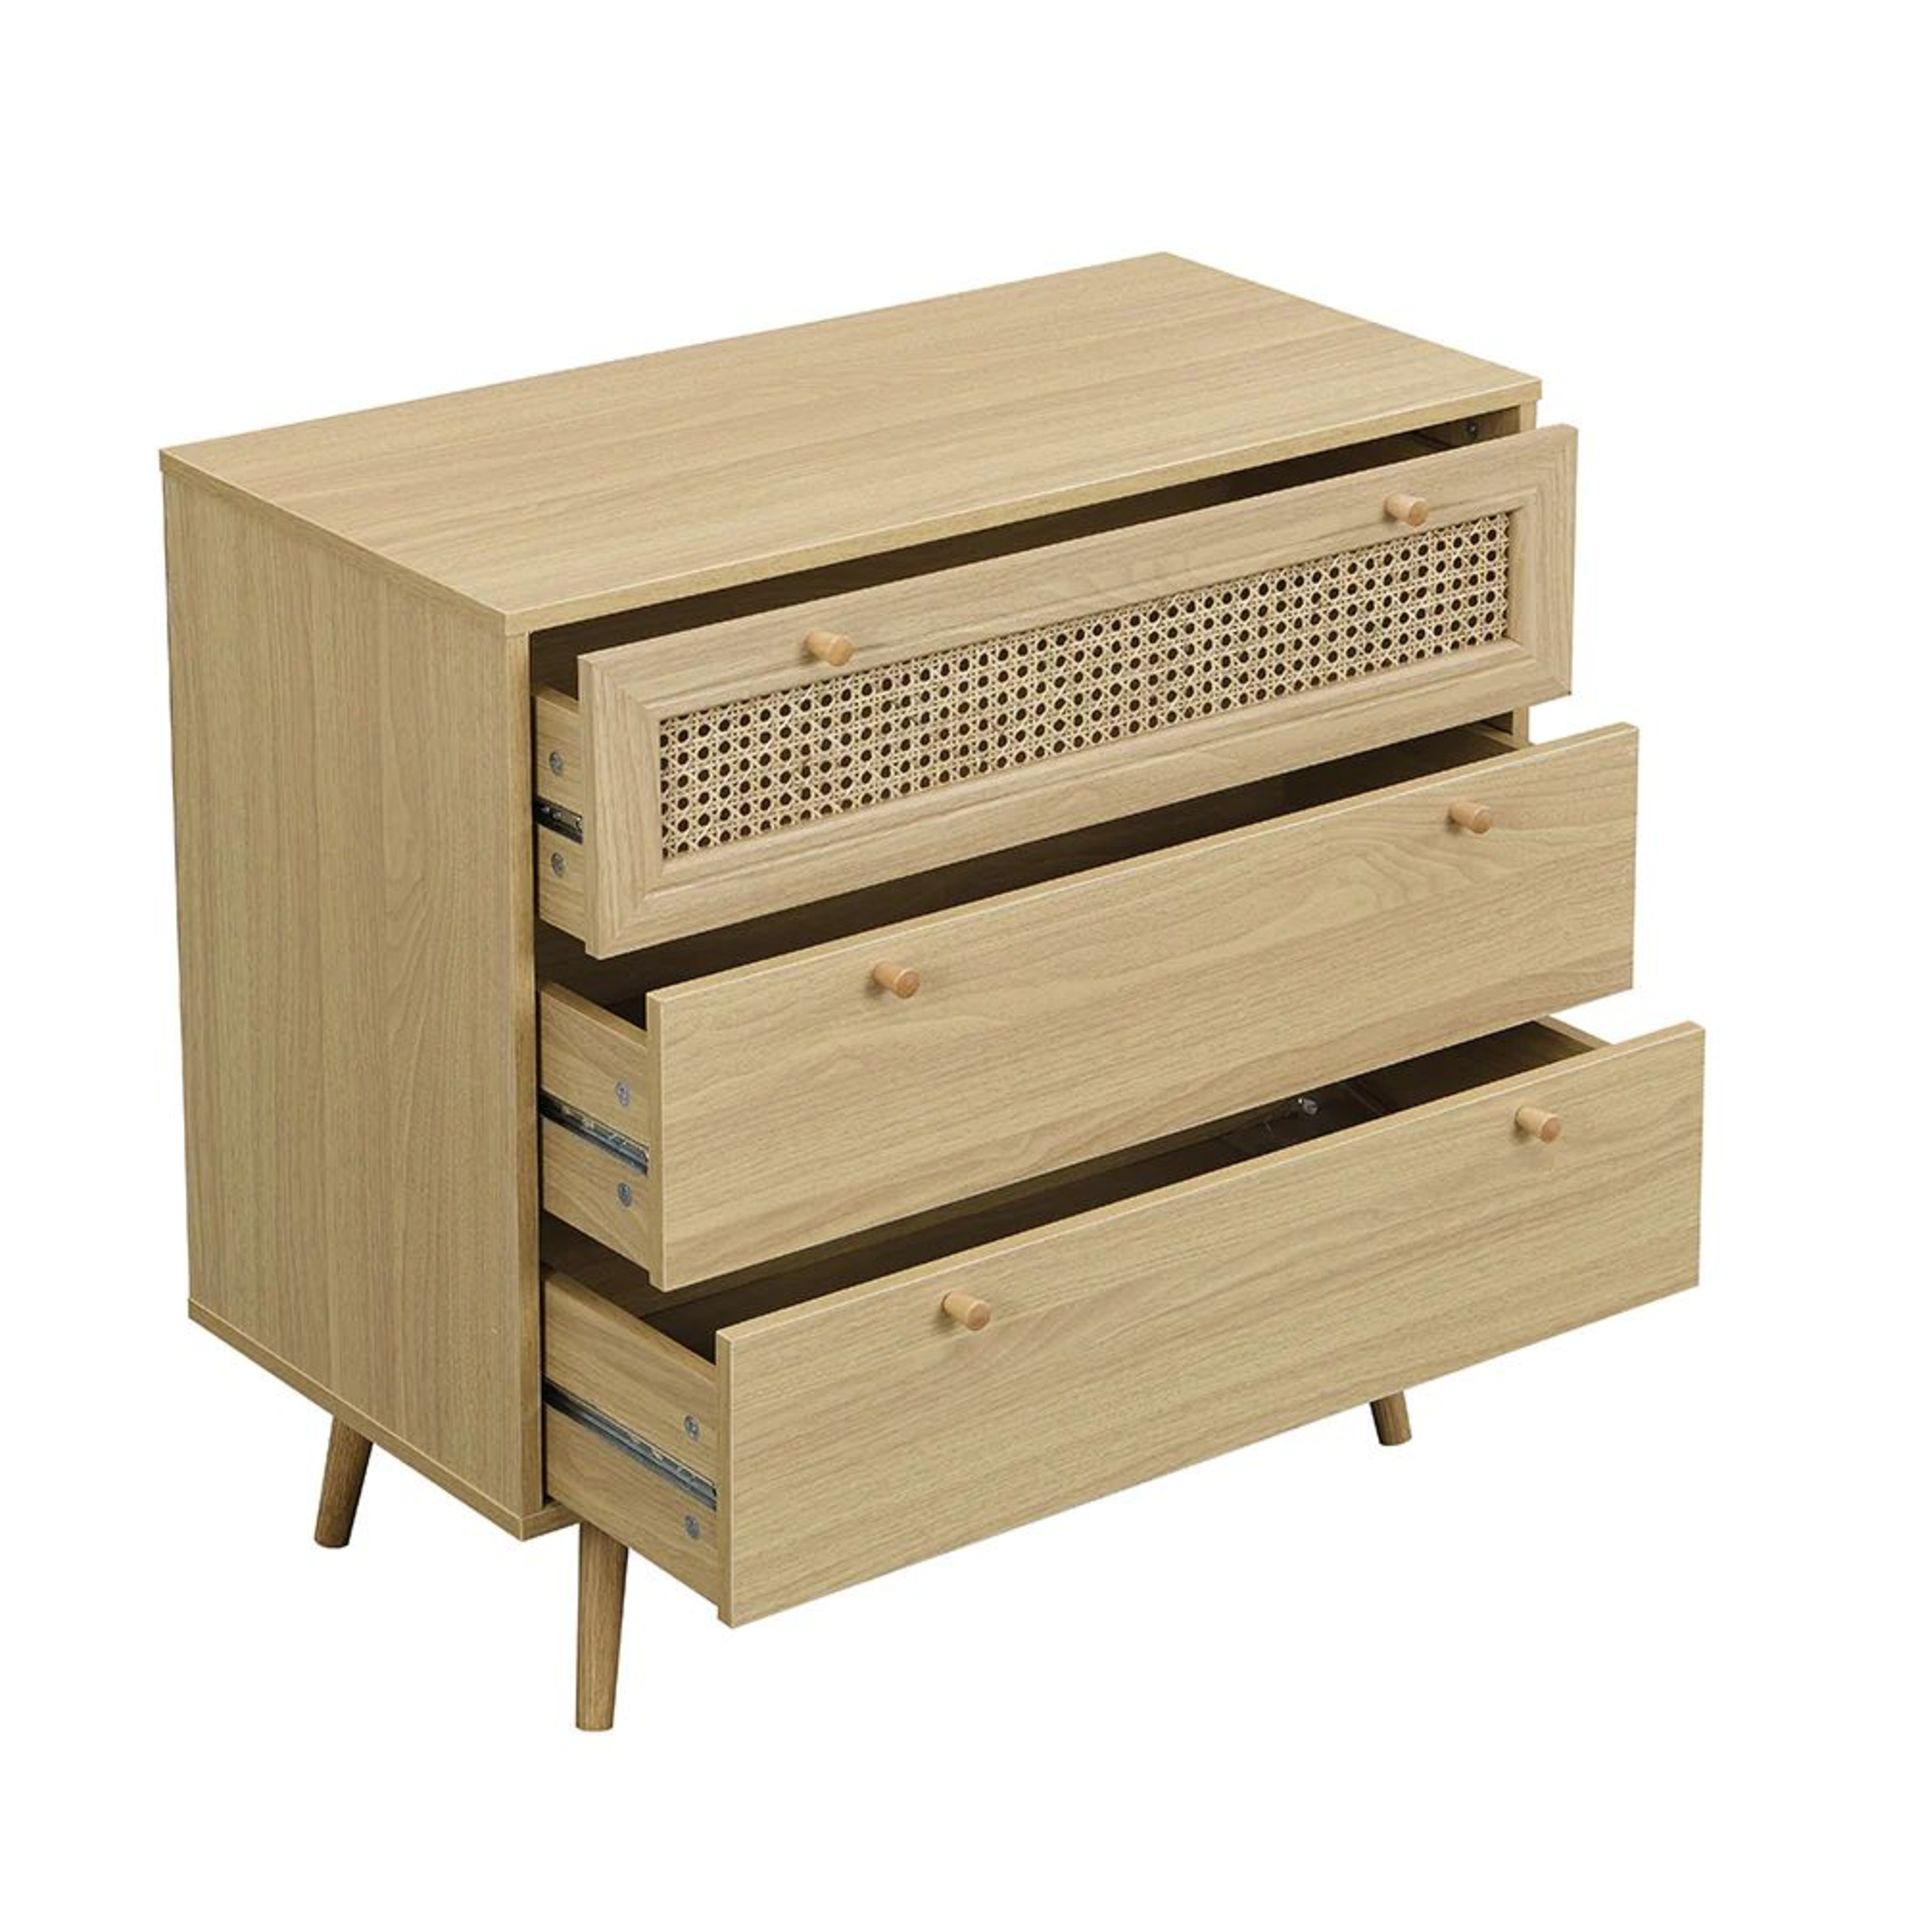 Anya Woven Rattan Chest of 3 Drawer in Natural Colour. - ER30. RRP £199.99. Our Anya drawer chest is - Image 2 of 2